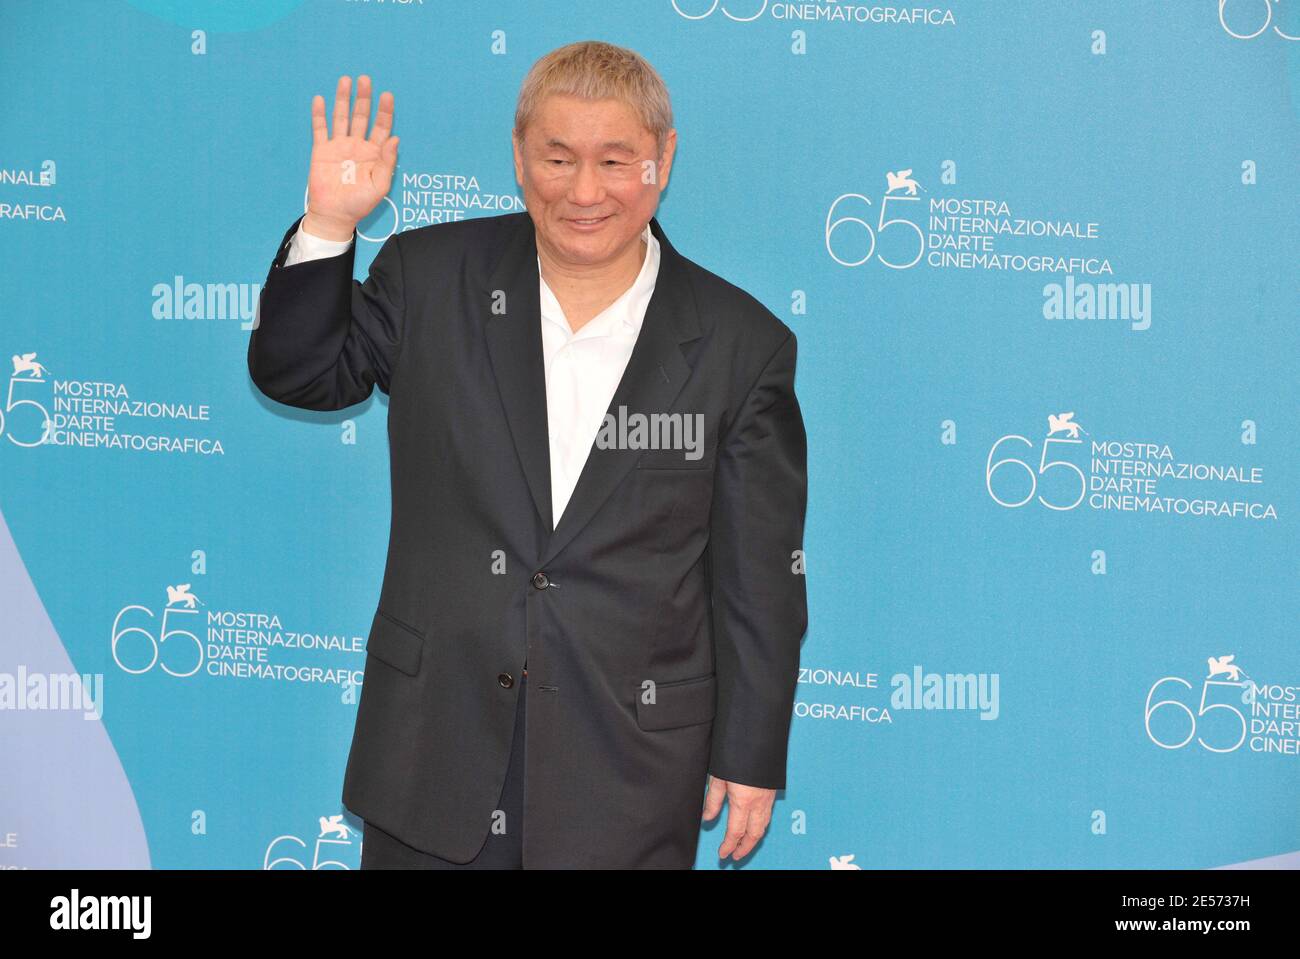 Japanese director Takeshi Kitano poses during a photocall for his movie 'Achilles to Kame' during the 65th Mostra Venice Film Festival at Venice Lido in Venice, Italy on August 28, 2008. Photo by Thierry Orban/ABACAPRESS.COM Stock Photo